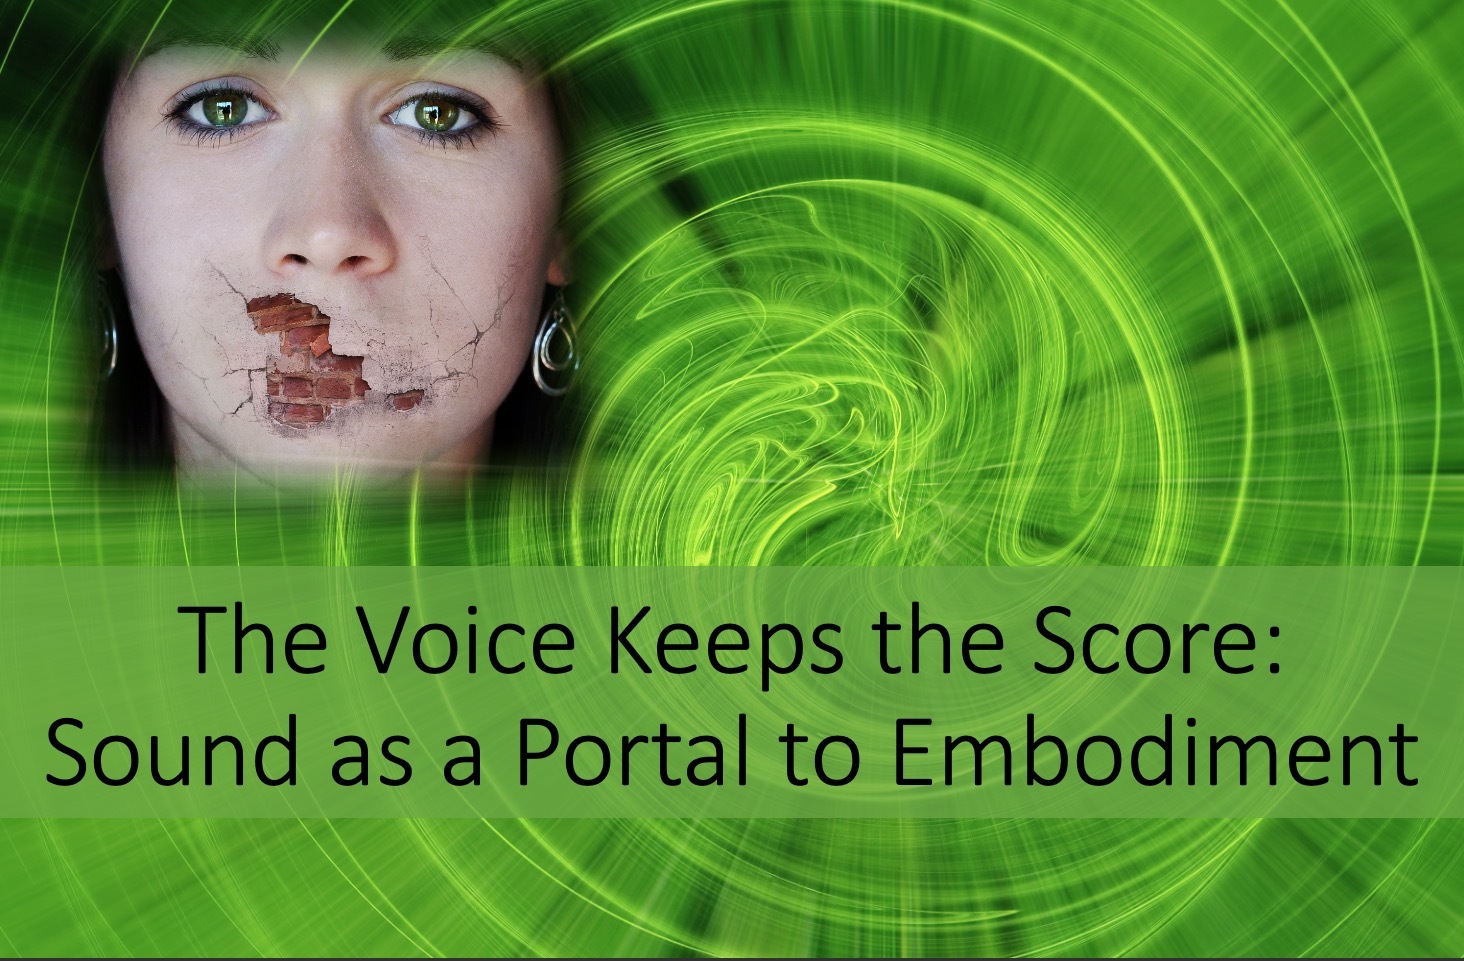 The Voice Keeps the Score: Sound as a Portal to Embodiment